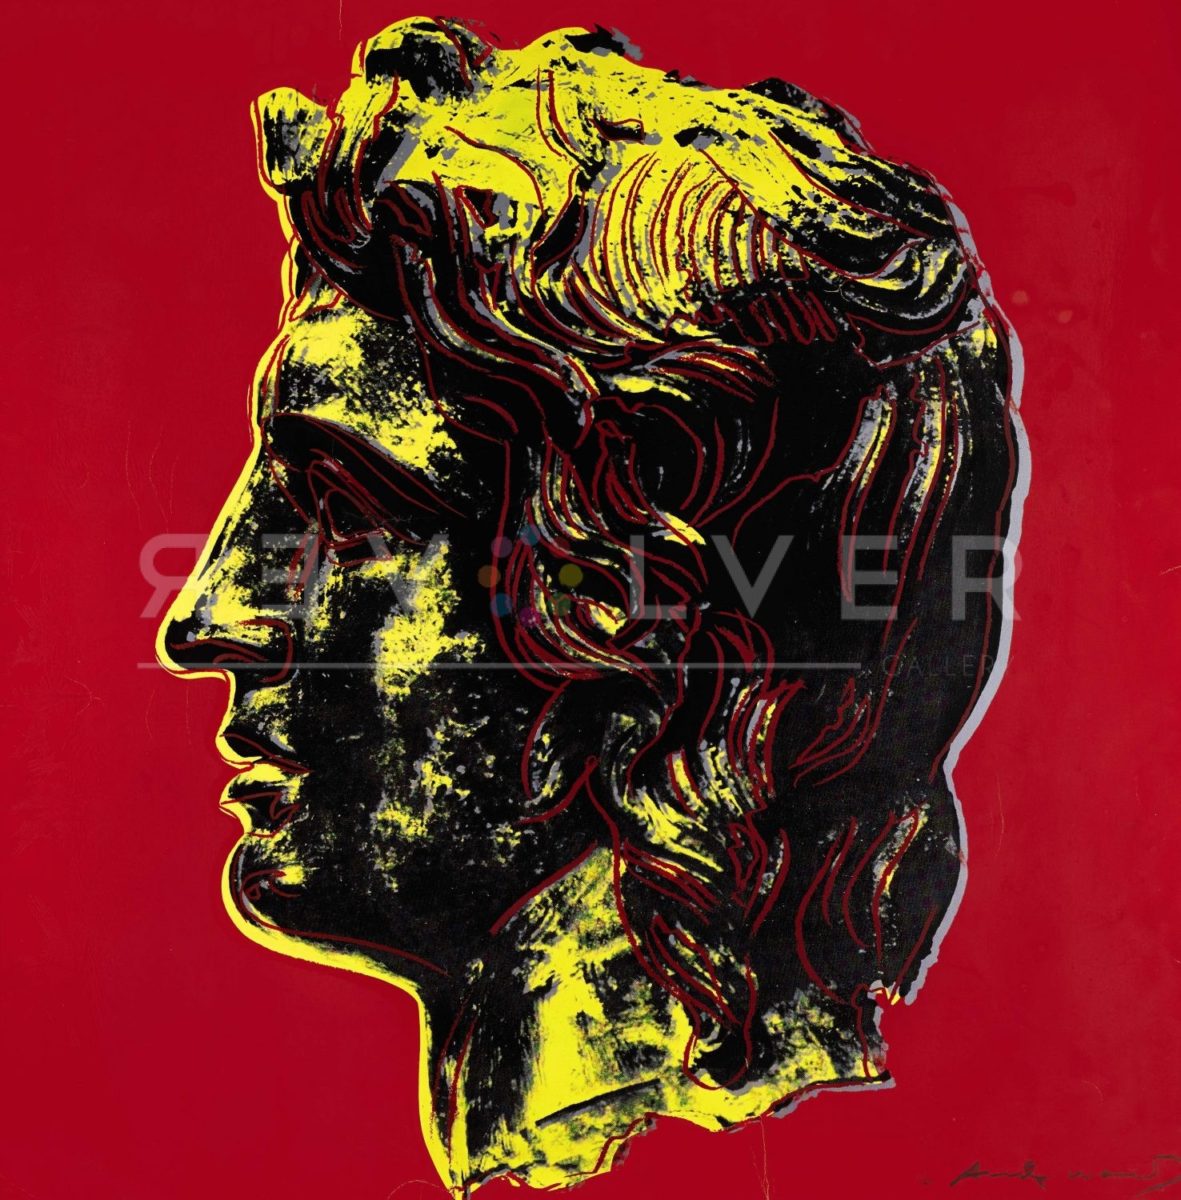 Andy Warhol Alexander the Great (FS.II.292), with Revolver Gallery watermark.